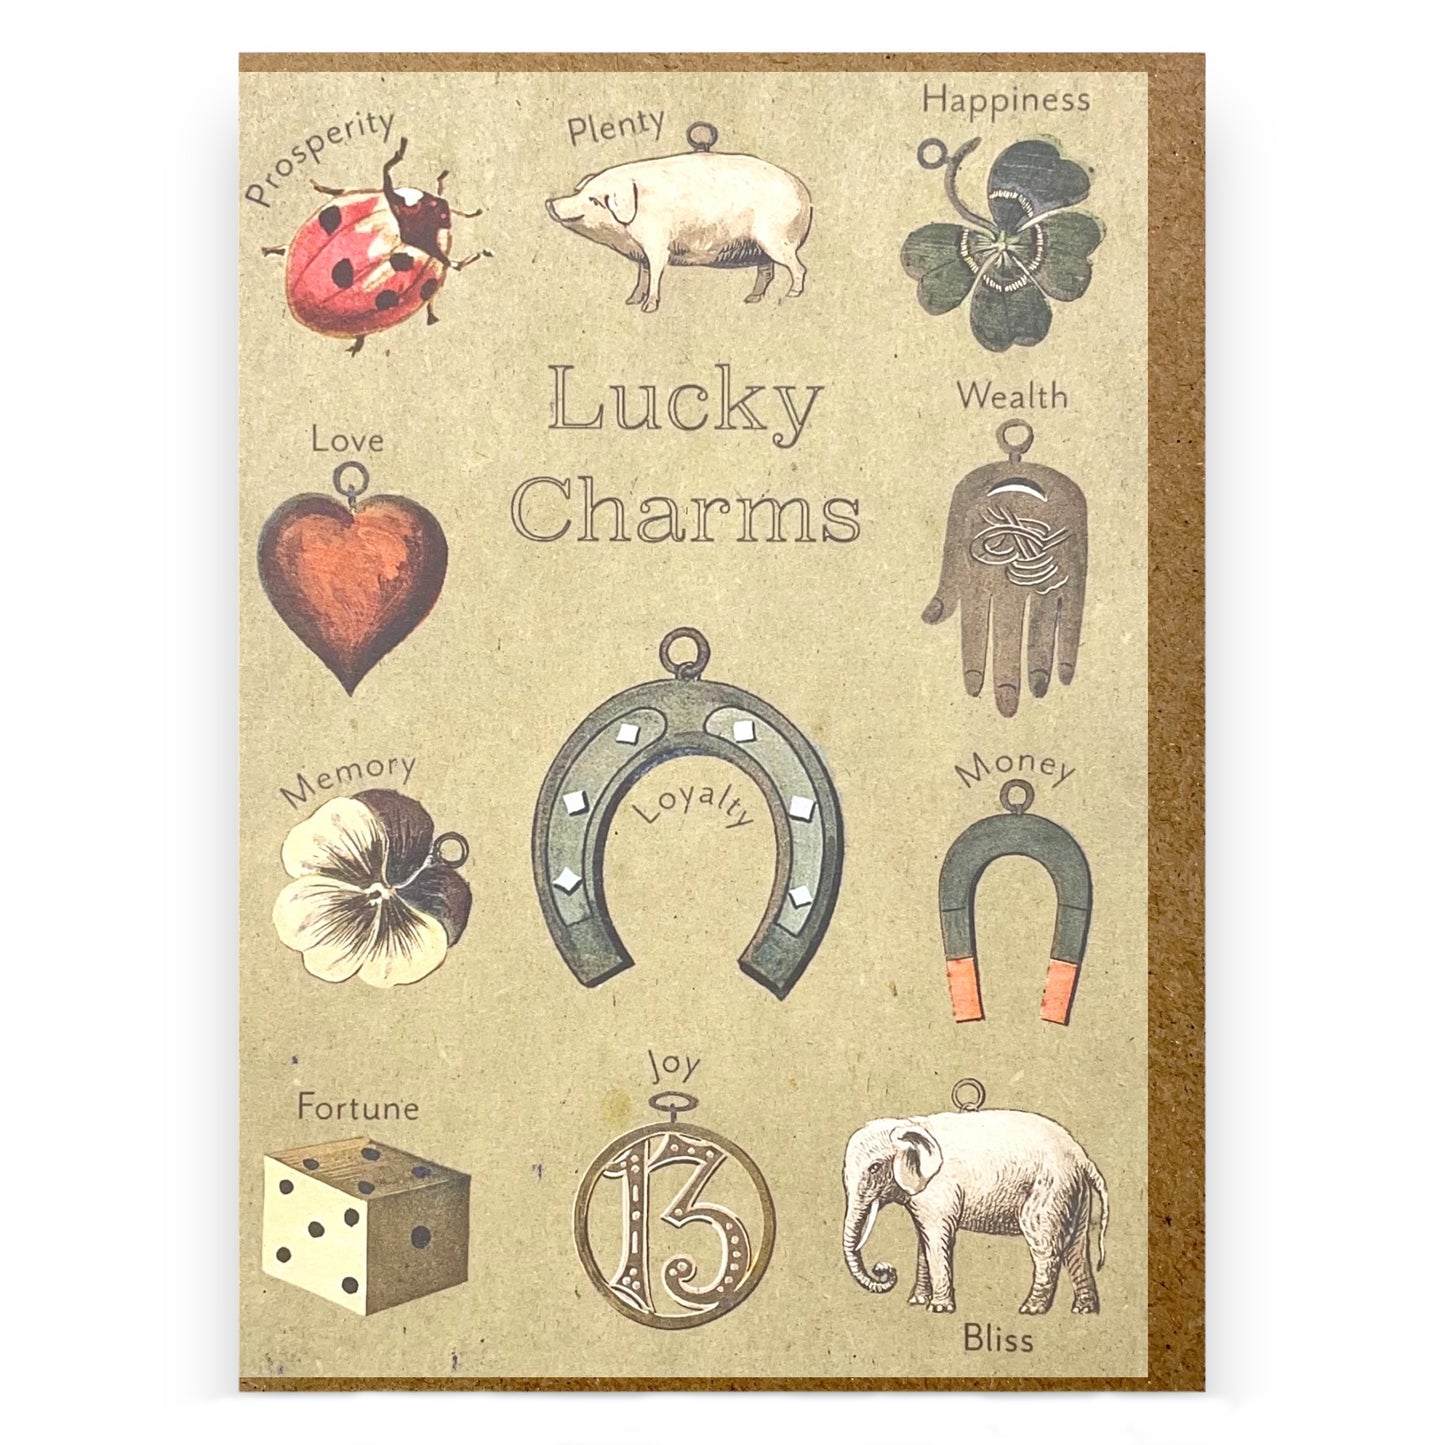 A greetings card by The Pattern Book with images of items that are considered a lucky charm and their meanings such as a horseshoe, no.13, a ladybird and clover.